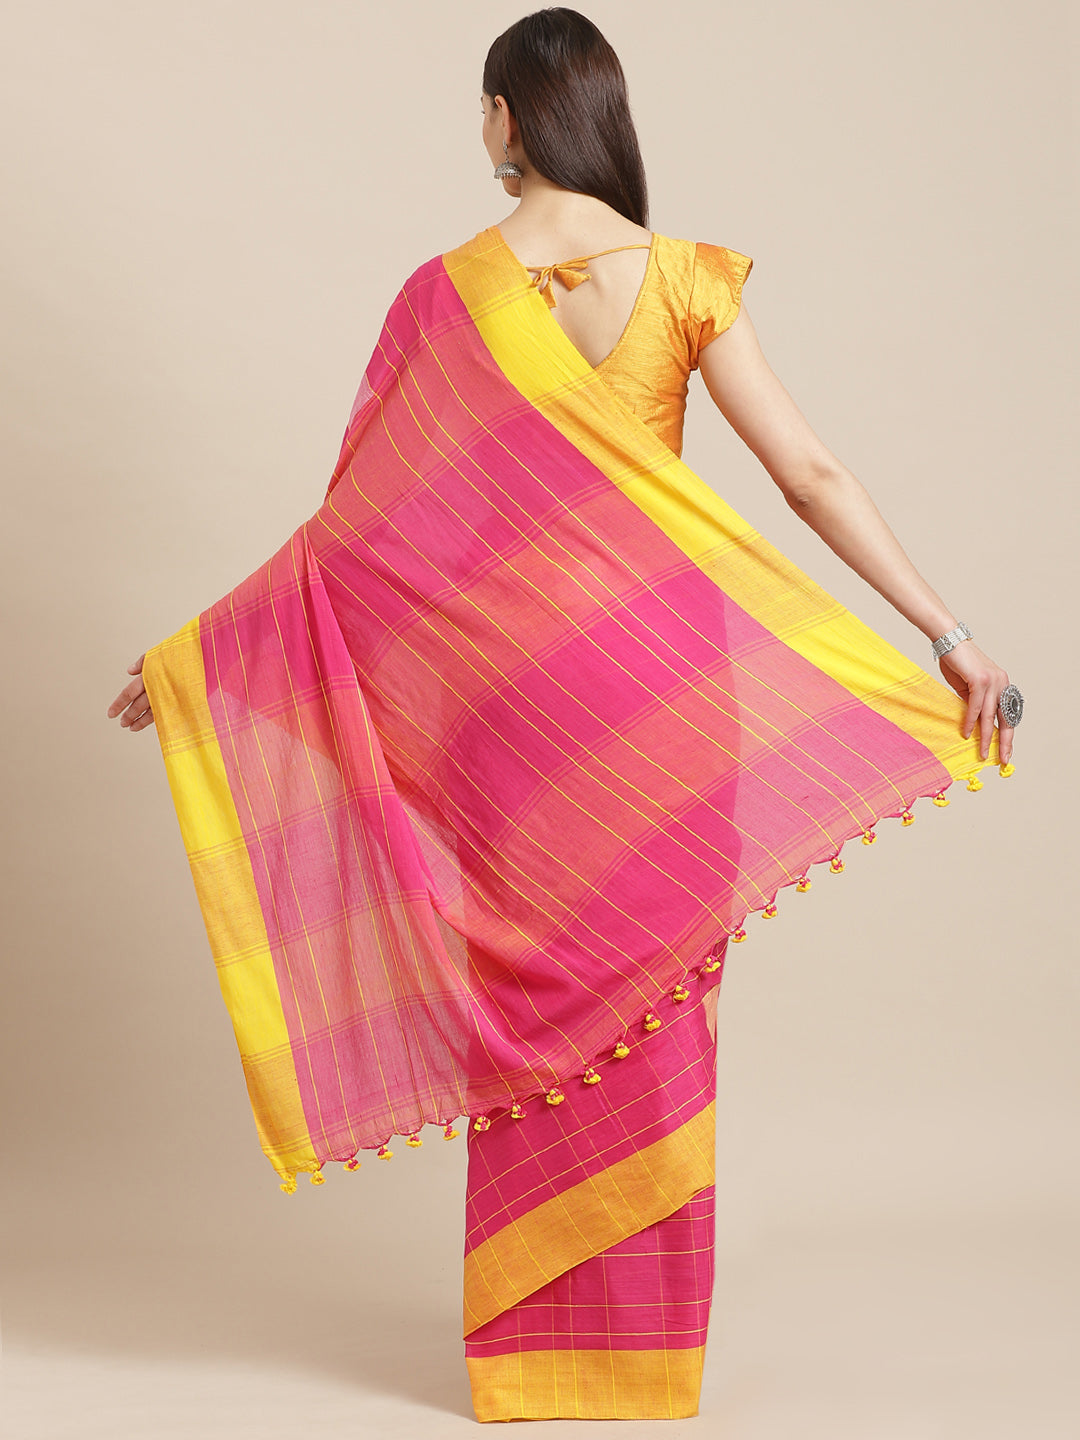 Pink and Yellow, Kalakari India Cotton Pink Hand crafted saree with blouse SHBESA0025-Saree-Kalakari India-SHBESA0025-Bengal, Cotton, Geographical Indication, Hand Crafted, Heritage Prints, Ikkat, Natural Dyes, Red, Sarees, Sustainable Fabrics, Woven, Yellow-[Linen,Ethnic,wear,Fashionista,Handloom,Handicraft,Indigo,blockprint,block,print,Cotton,Chanderi,Blue, latest,classy,party,bollywood,trendy,summer,style,traditional,formal,elegant,unique,style,hand,block,print, dabu,booti,gift,present,glamor